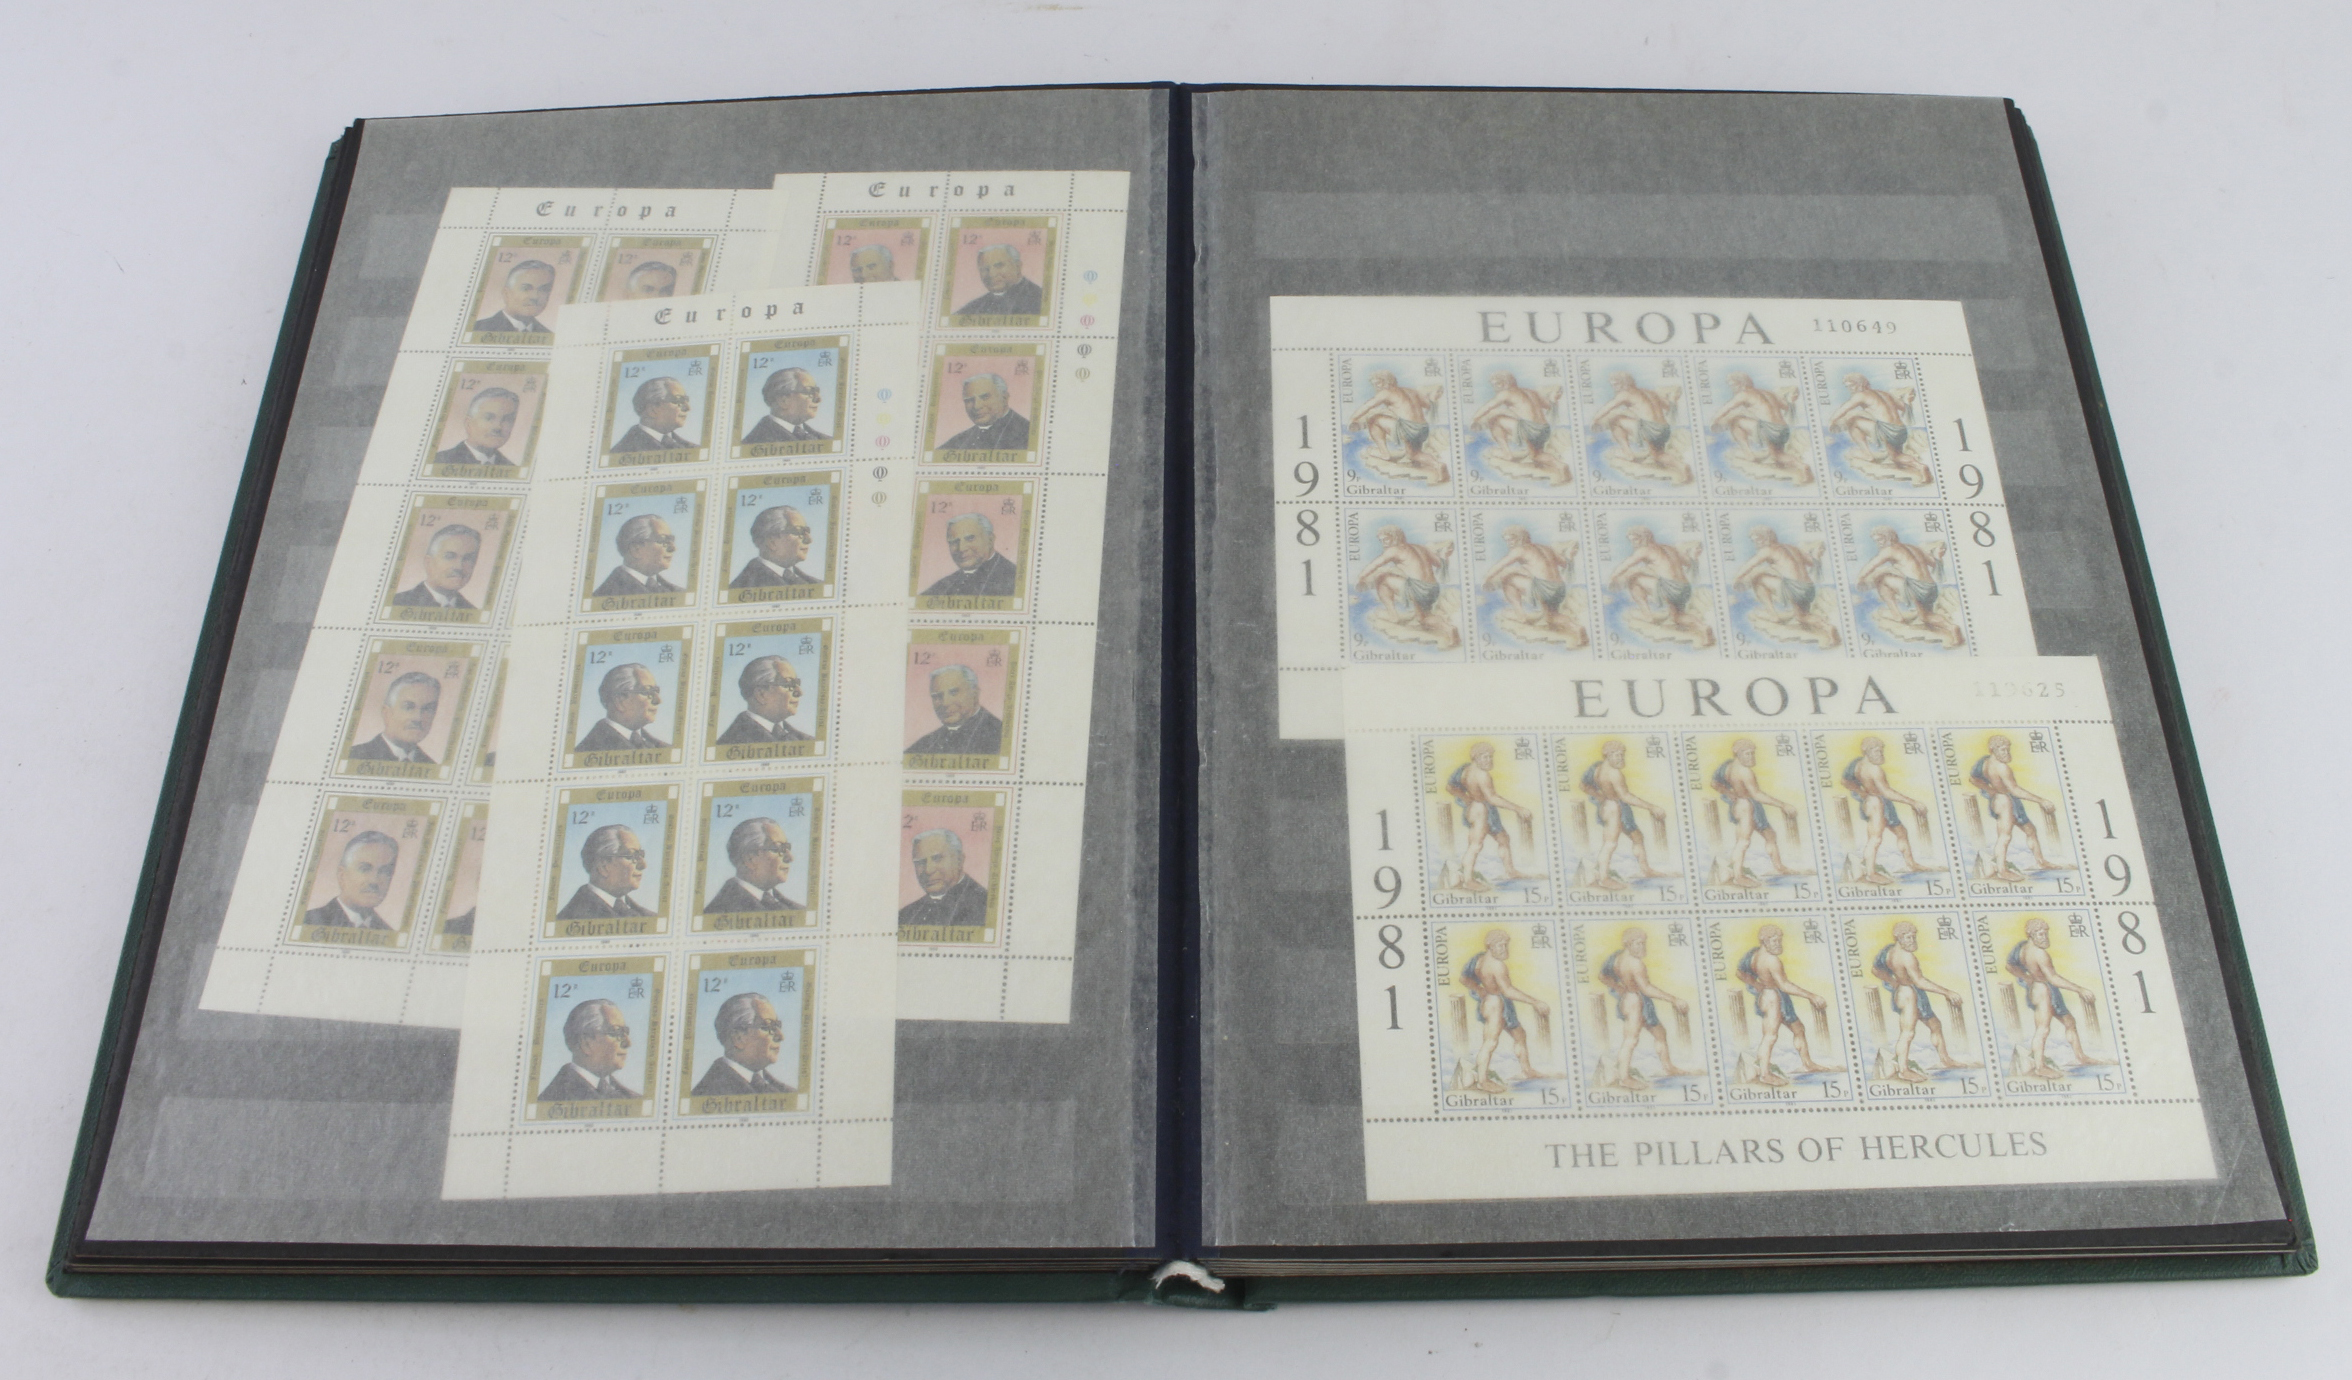 Gibraltar issues from QV, GV & GVI including better values, QE2 sets incl Europa sheetlets set.